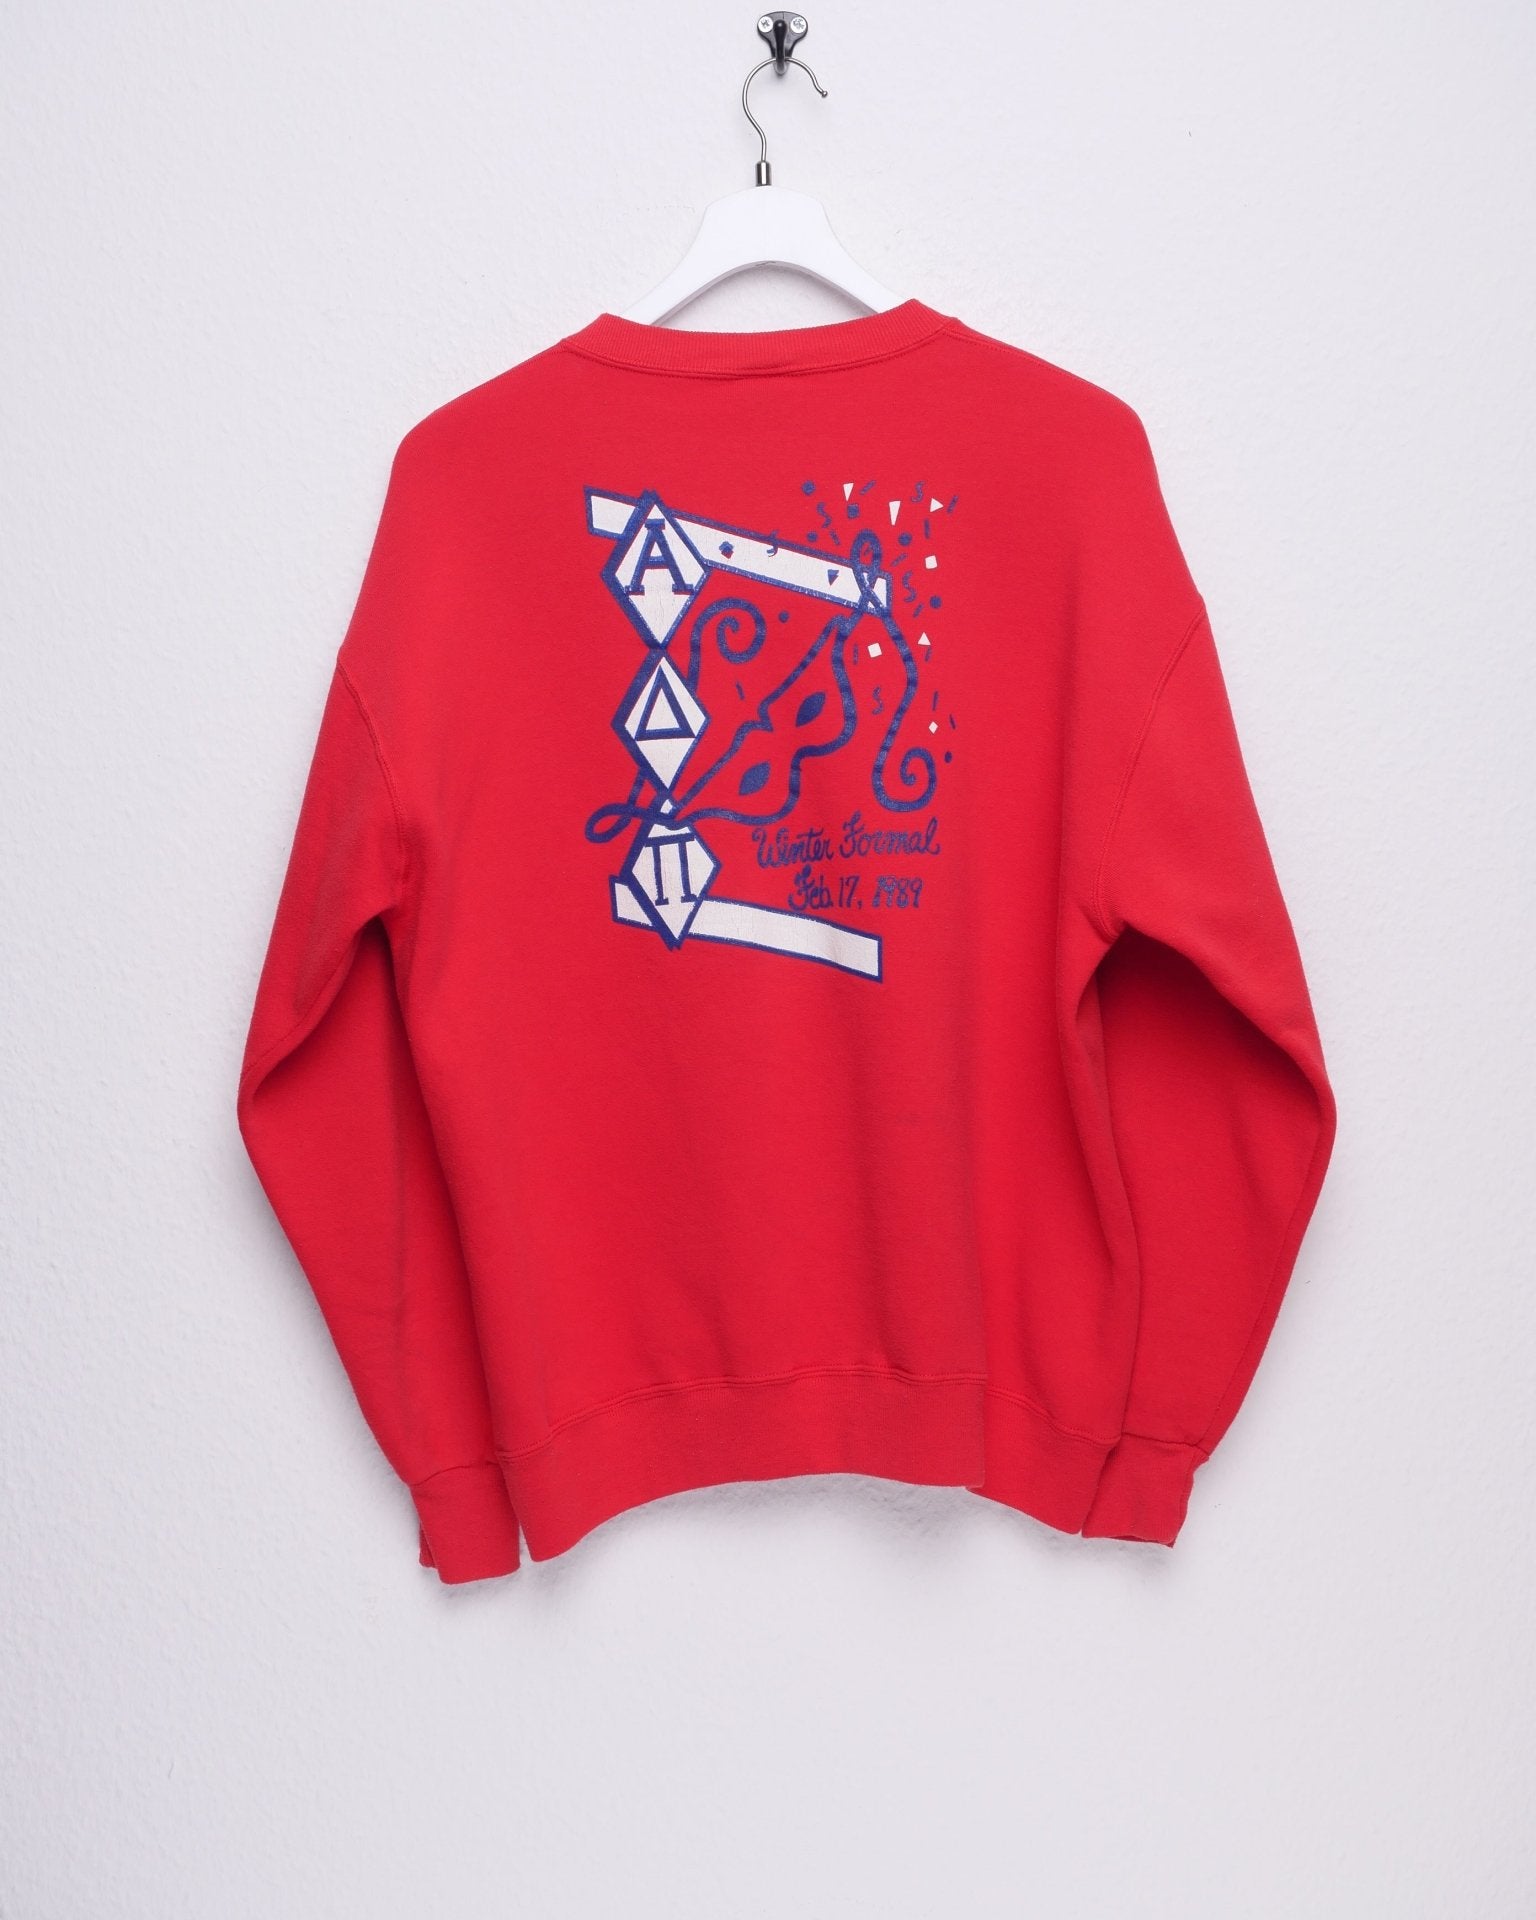 Russell Athletic Alpha Delta Phi 1989 printed Logo Vintage Sweater - Peeces